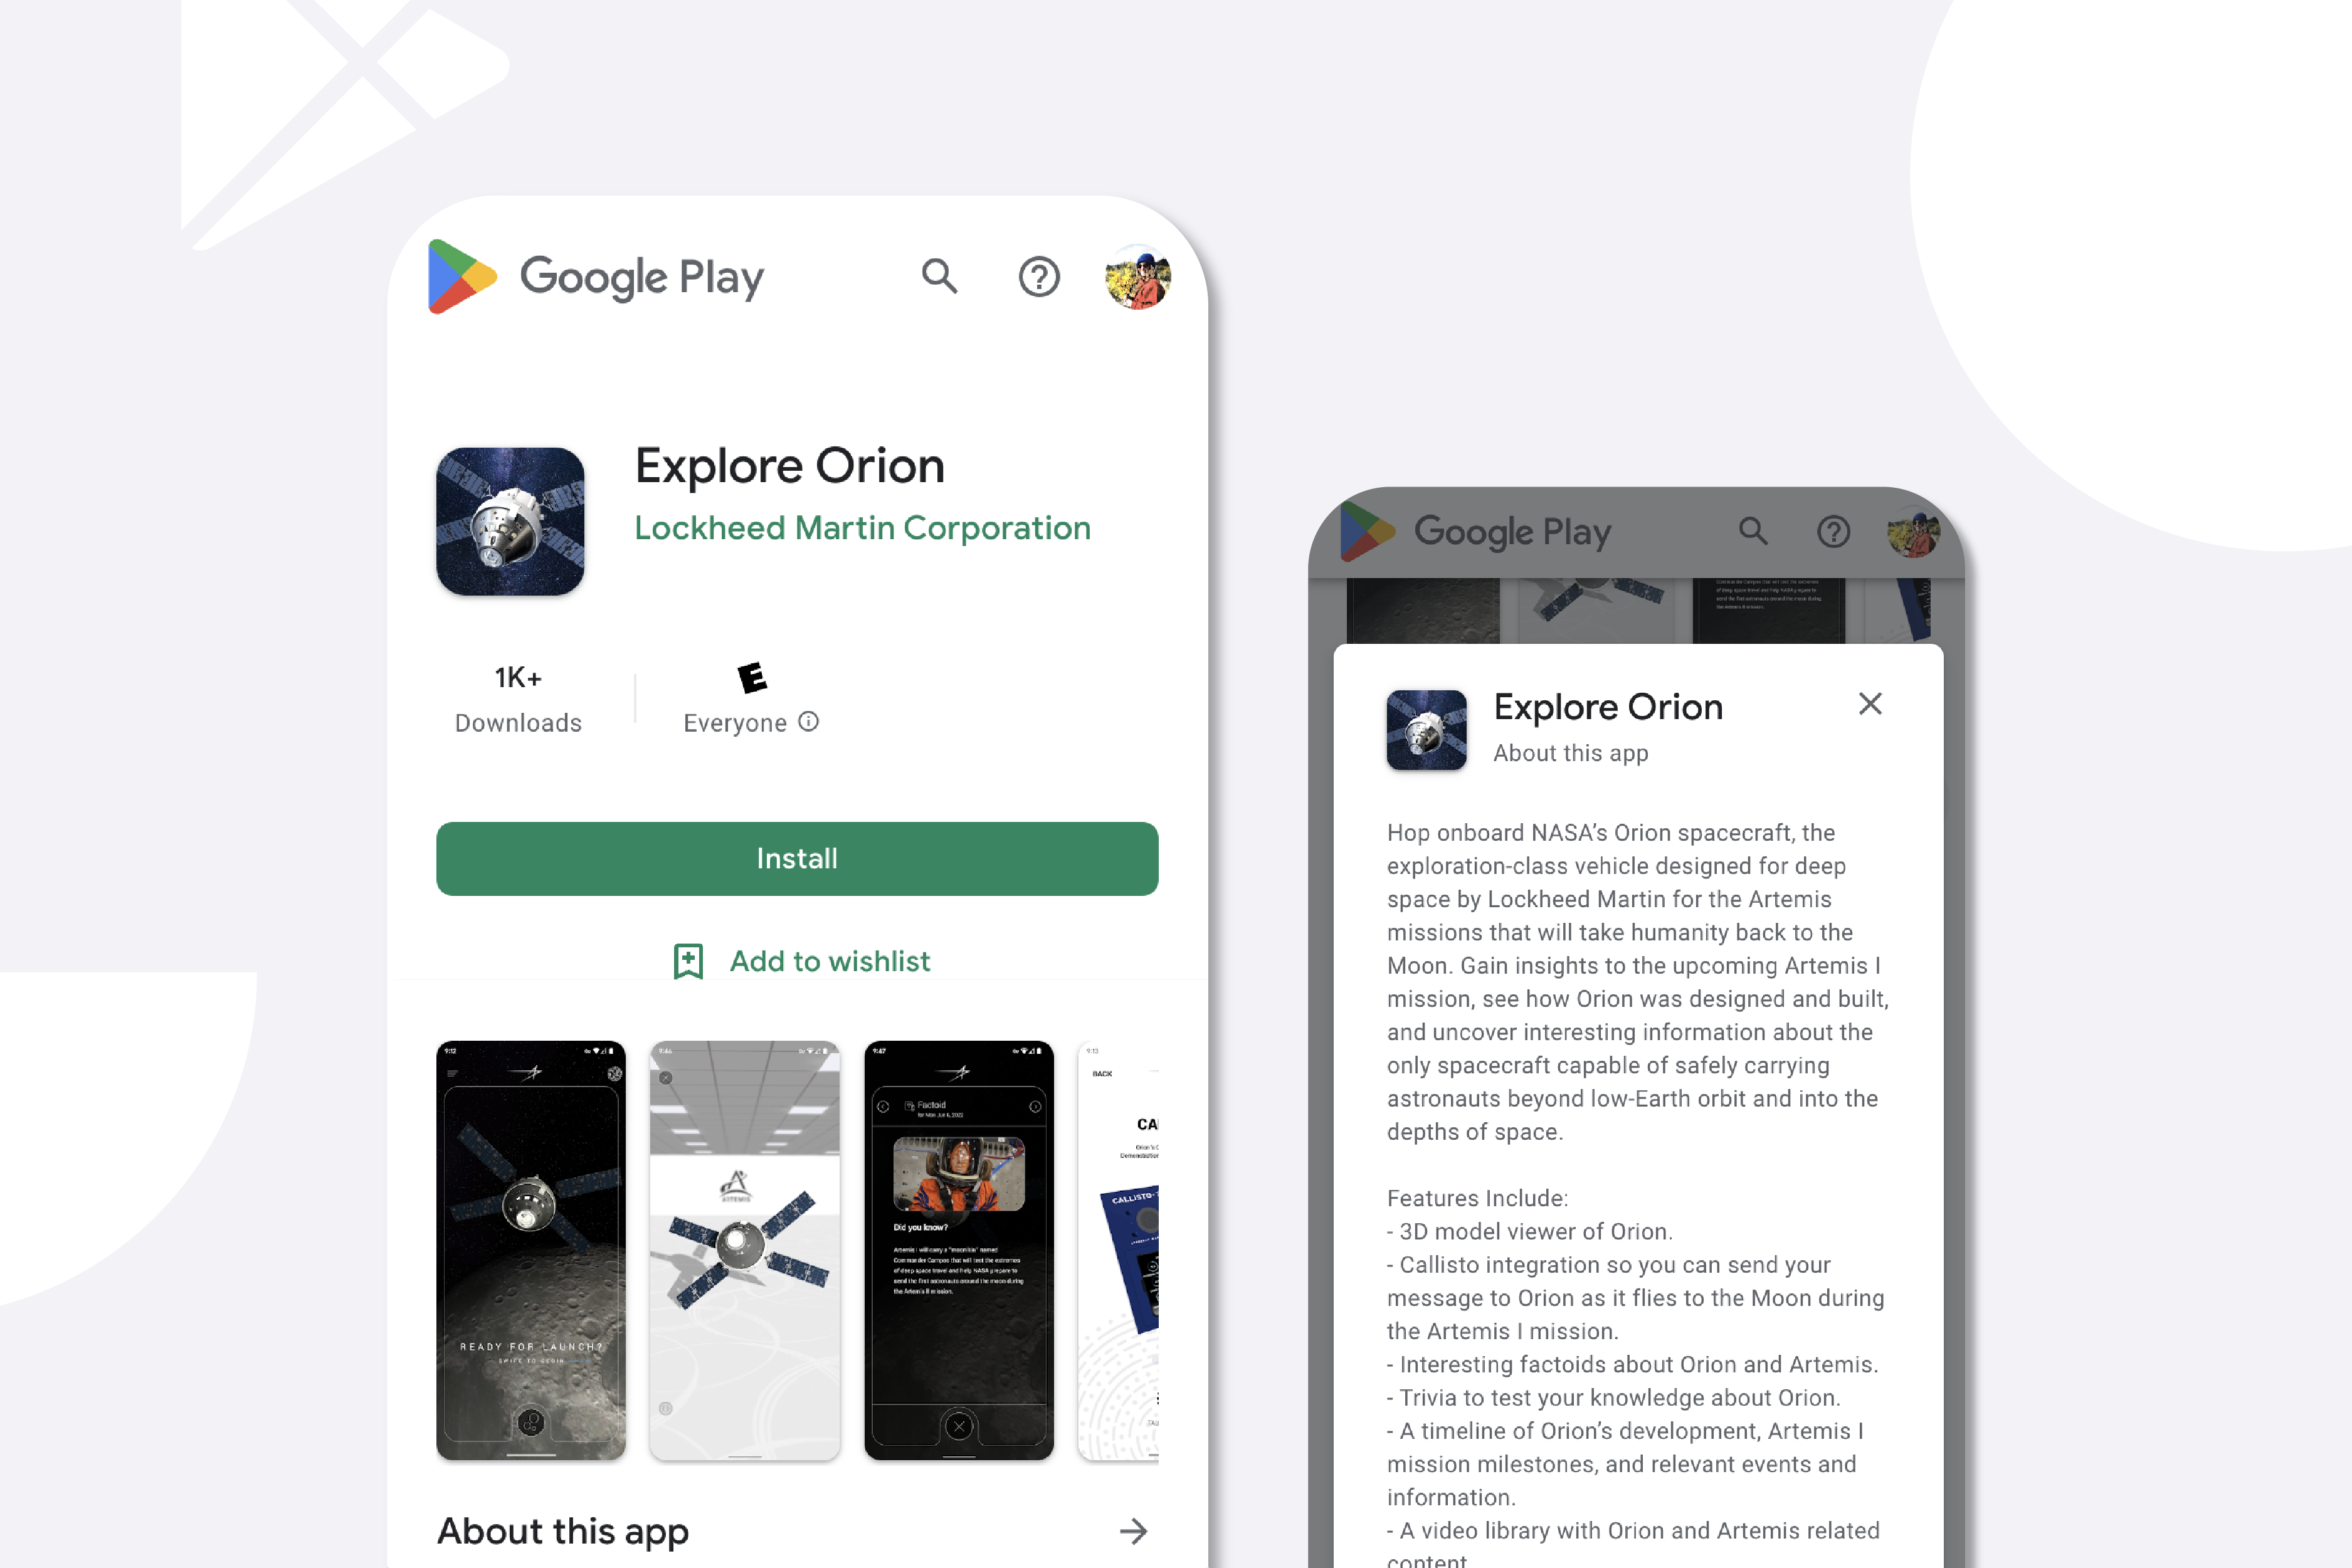 Android Developers Blog: Ensuring high-quality apps on Google Play